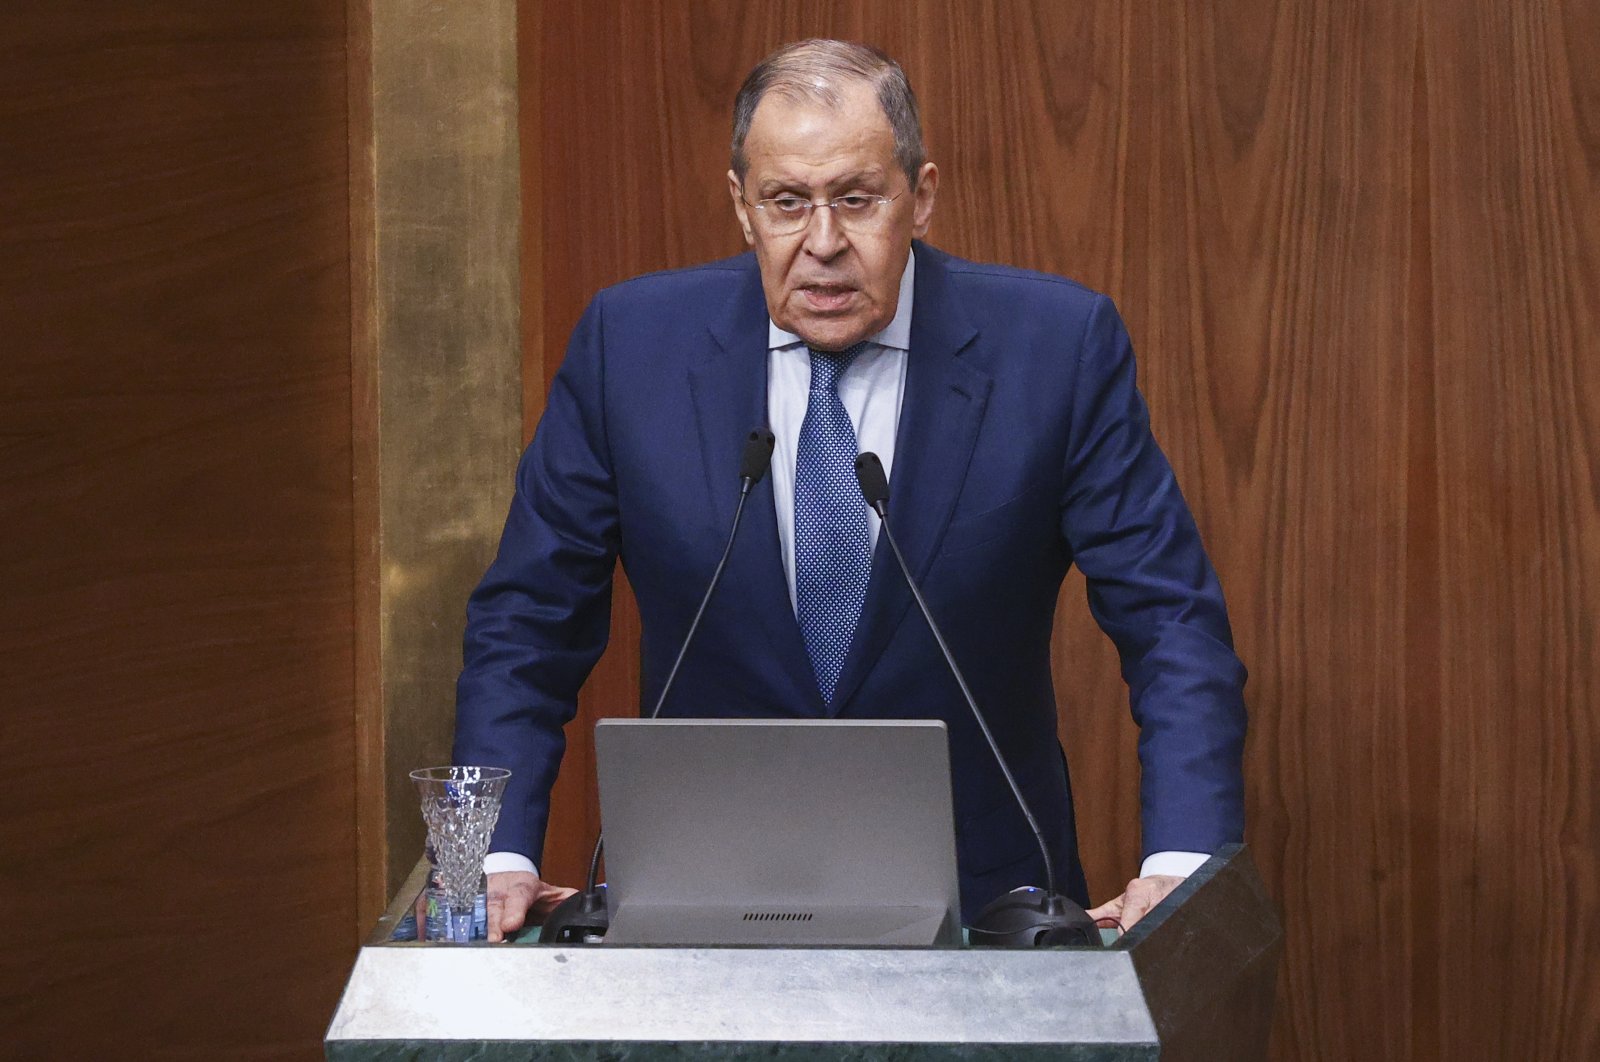 Russian Foreign Minister Sergey Lavrov addresses the Arab League organization in Cairo, Egypt, Sunday, July 24, 2022. (Russian Foreign Ministry Press Service via AP)